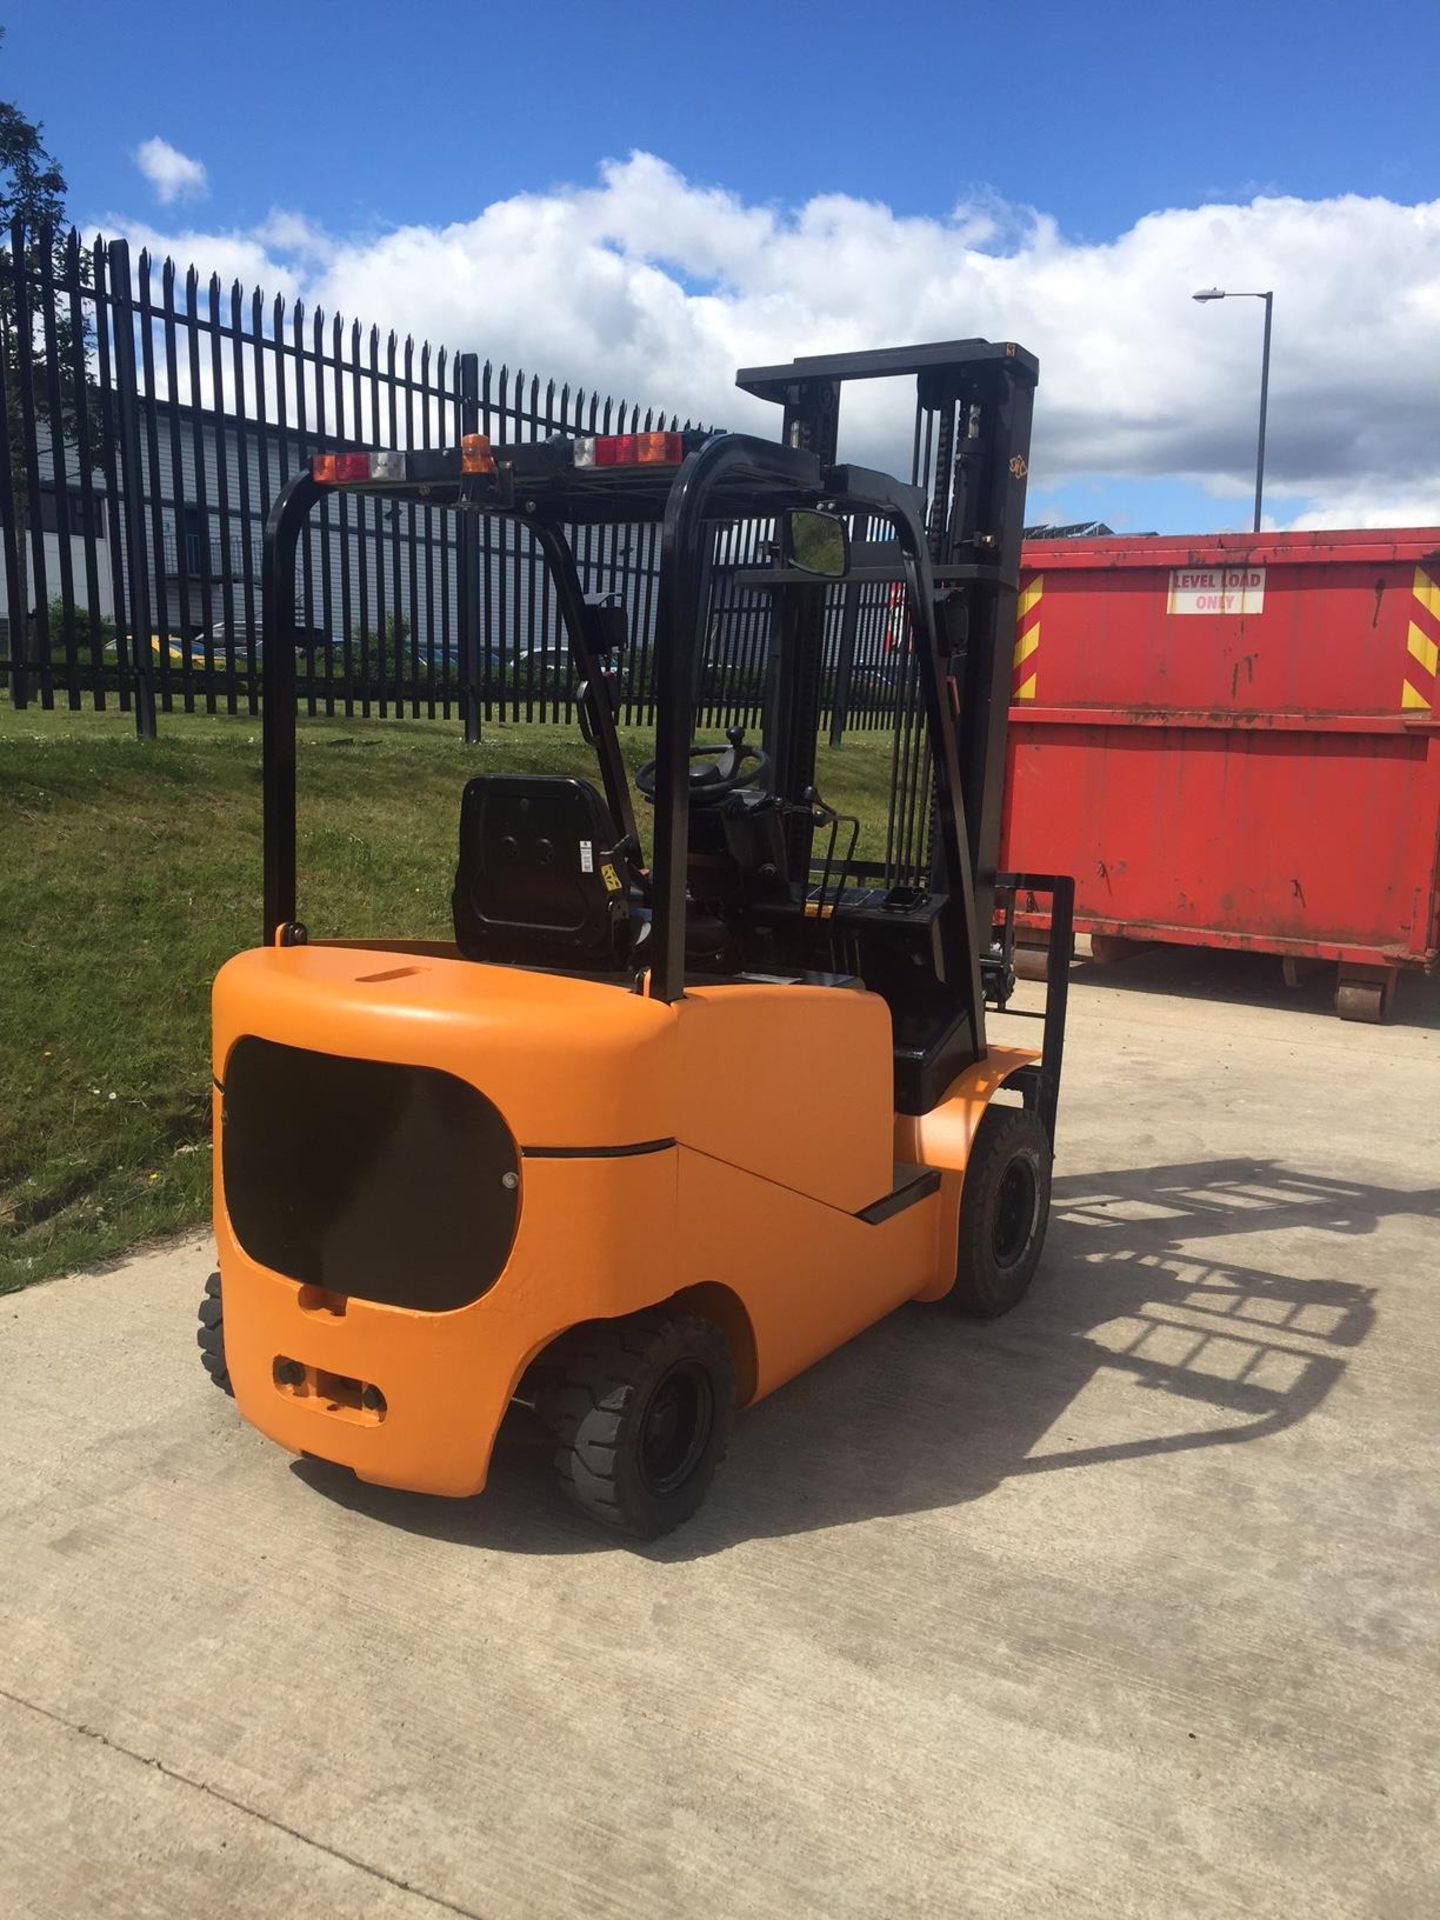 Sam-uk electric counterbalance fork lift truck - Fully refurbished and painted. - Image 7 of 9